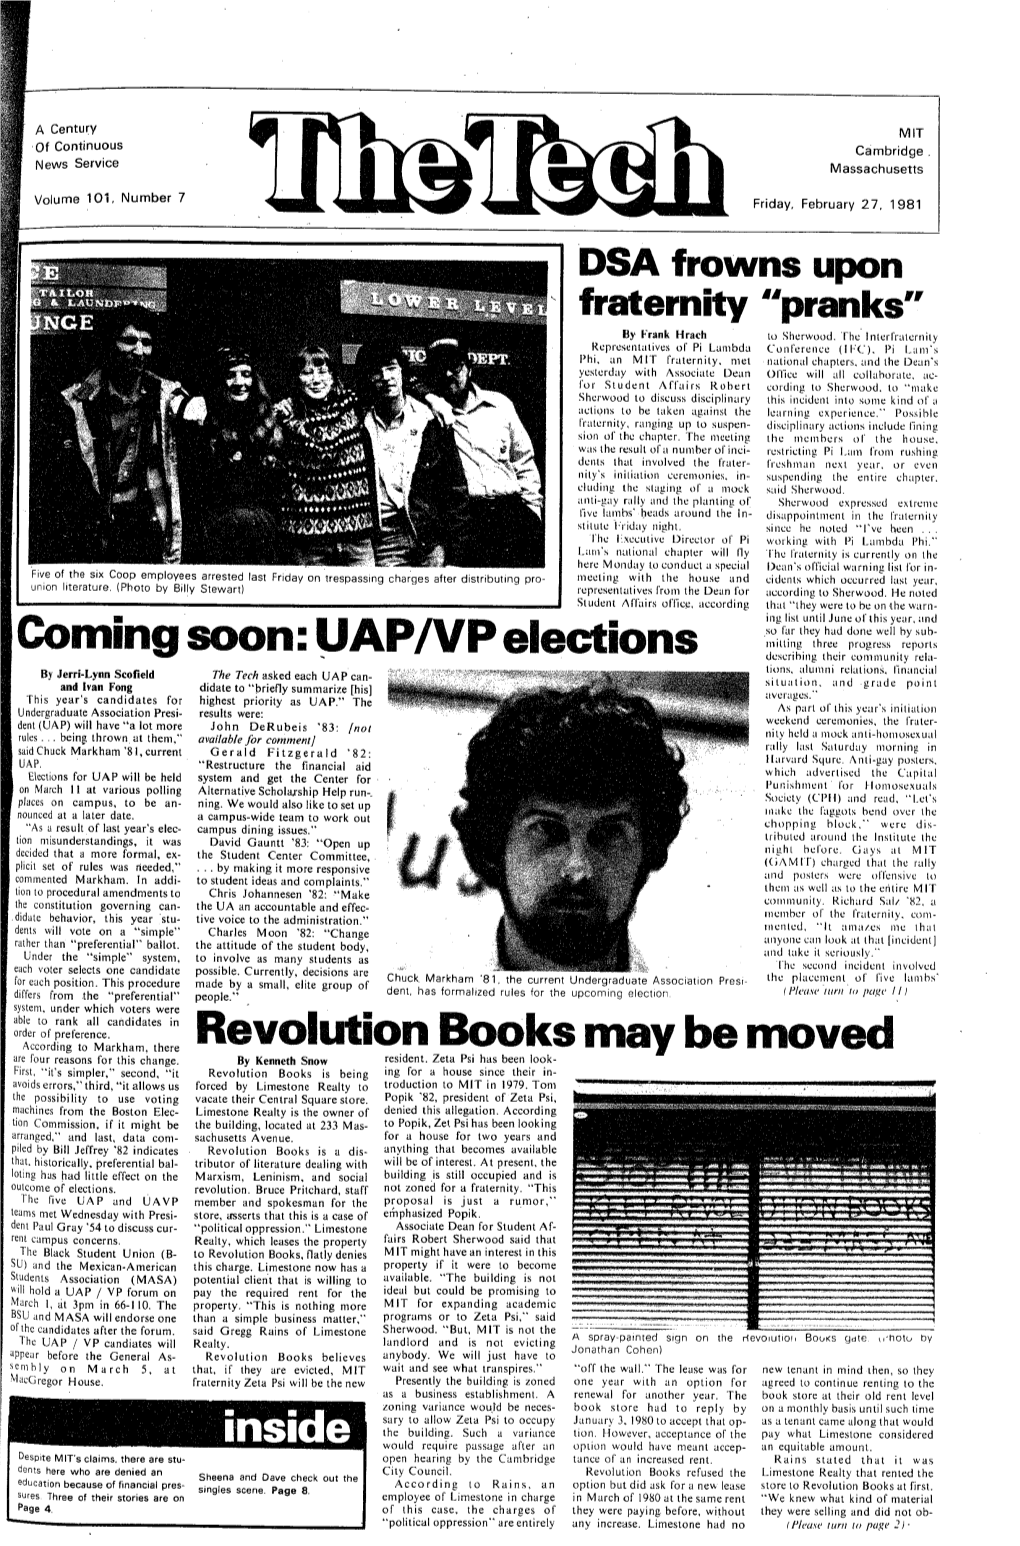 UAP/VP Elections Revolution Books May Be Moved